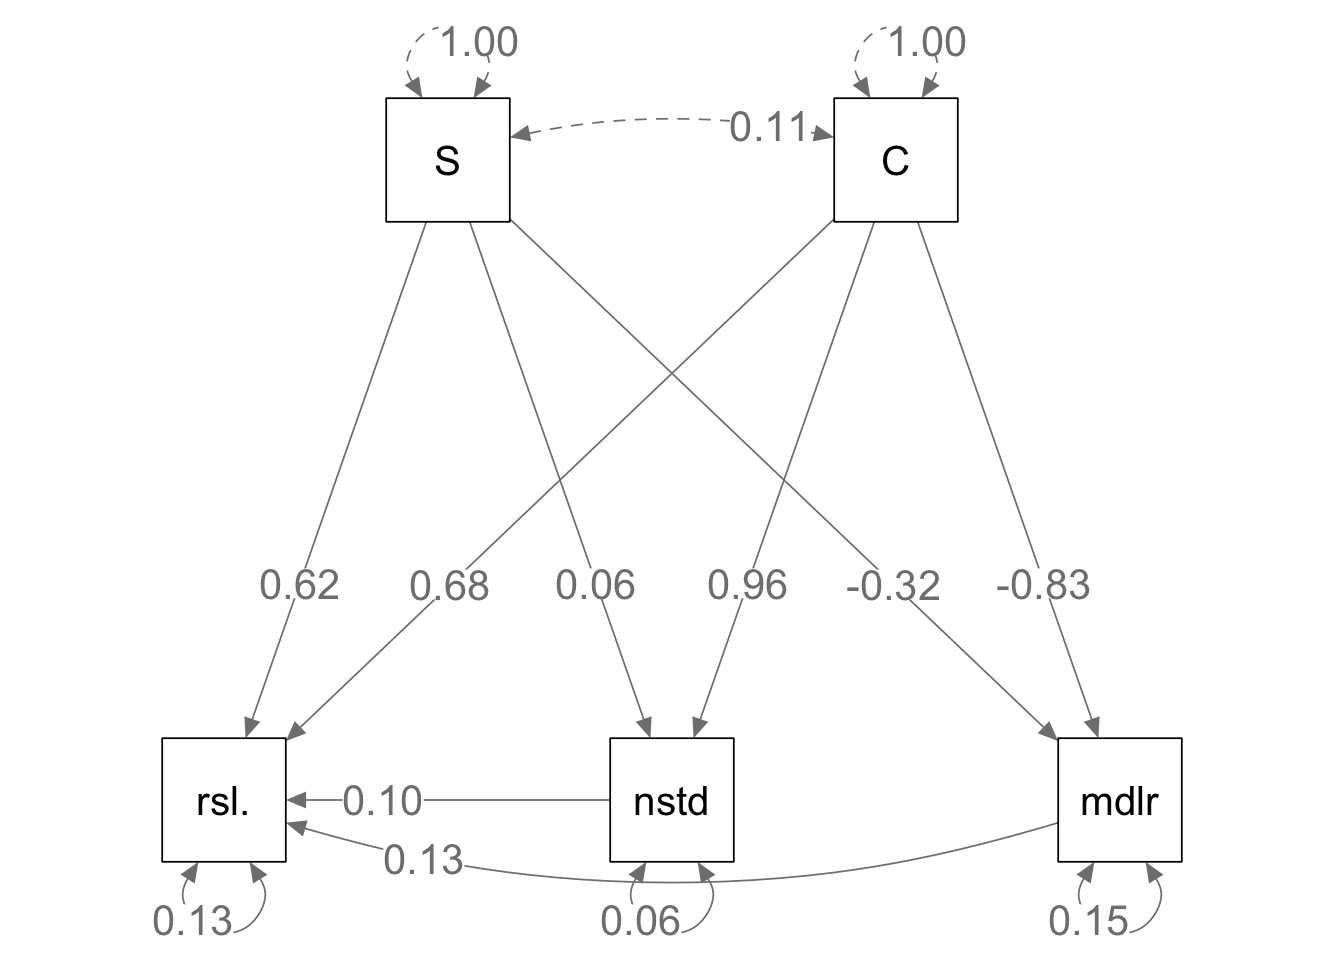 Given the same bipartite network structure and the identical interaction strengths, mutualistic (left) and antagonistic webs (right) show slightly different relations among emergent properties.